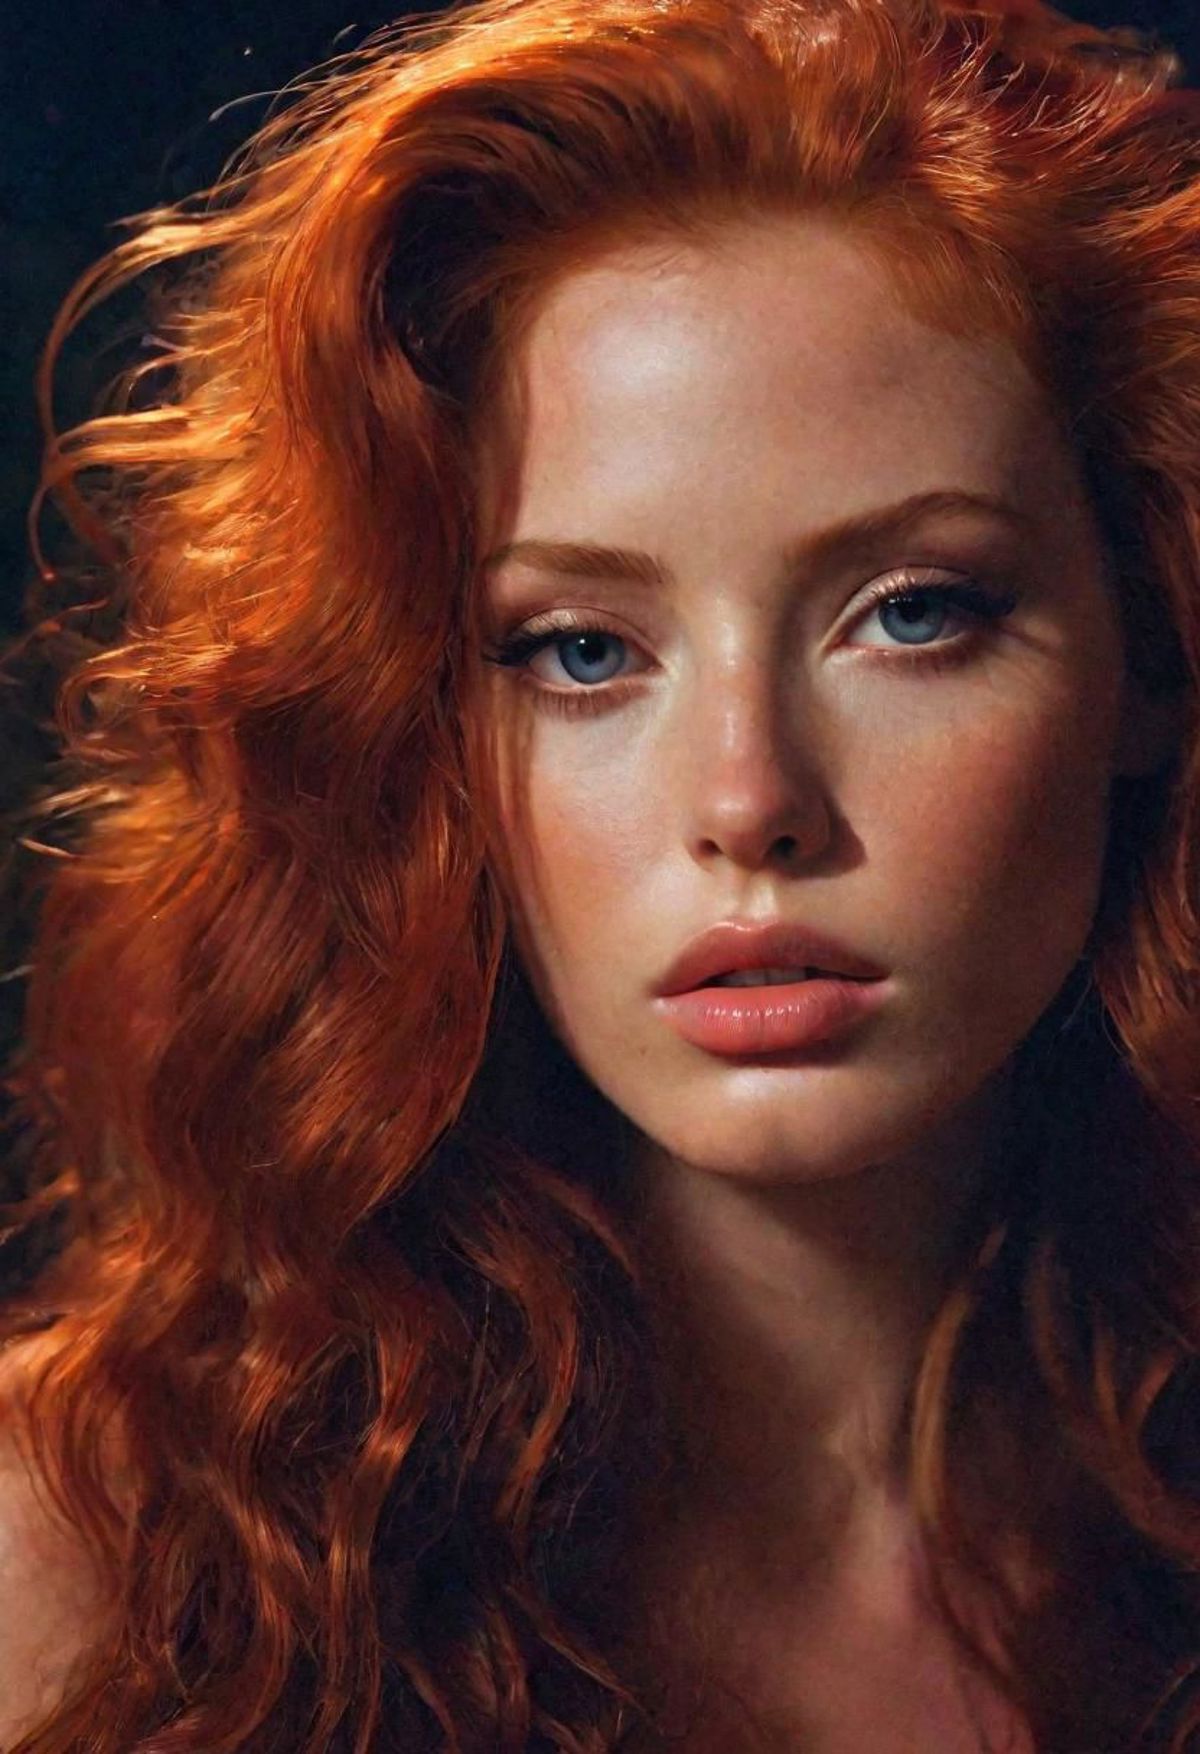 A Close-Up of a Woman with Red Hair and Blue Eyes.